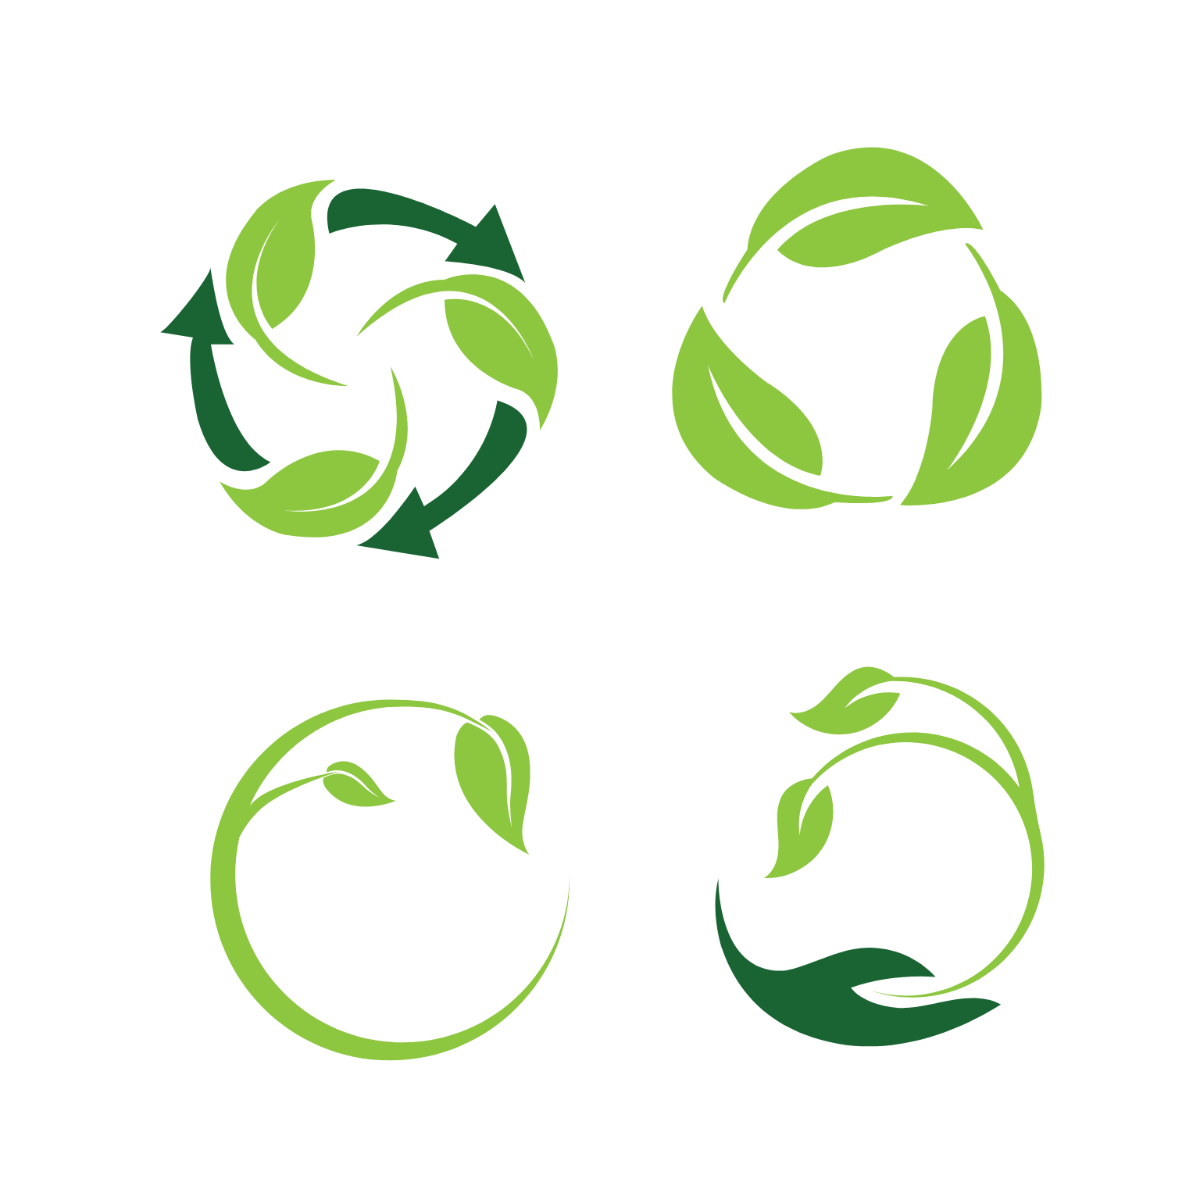 Recycle Leaf Vector